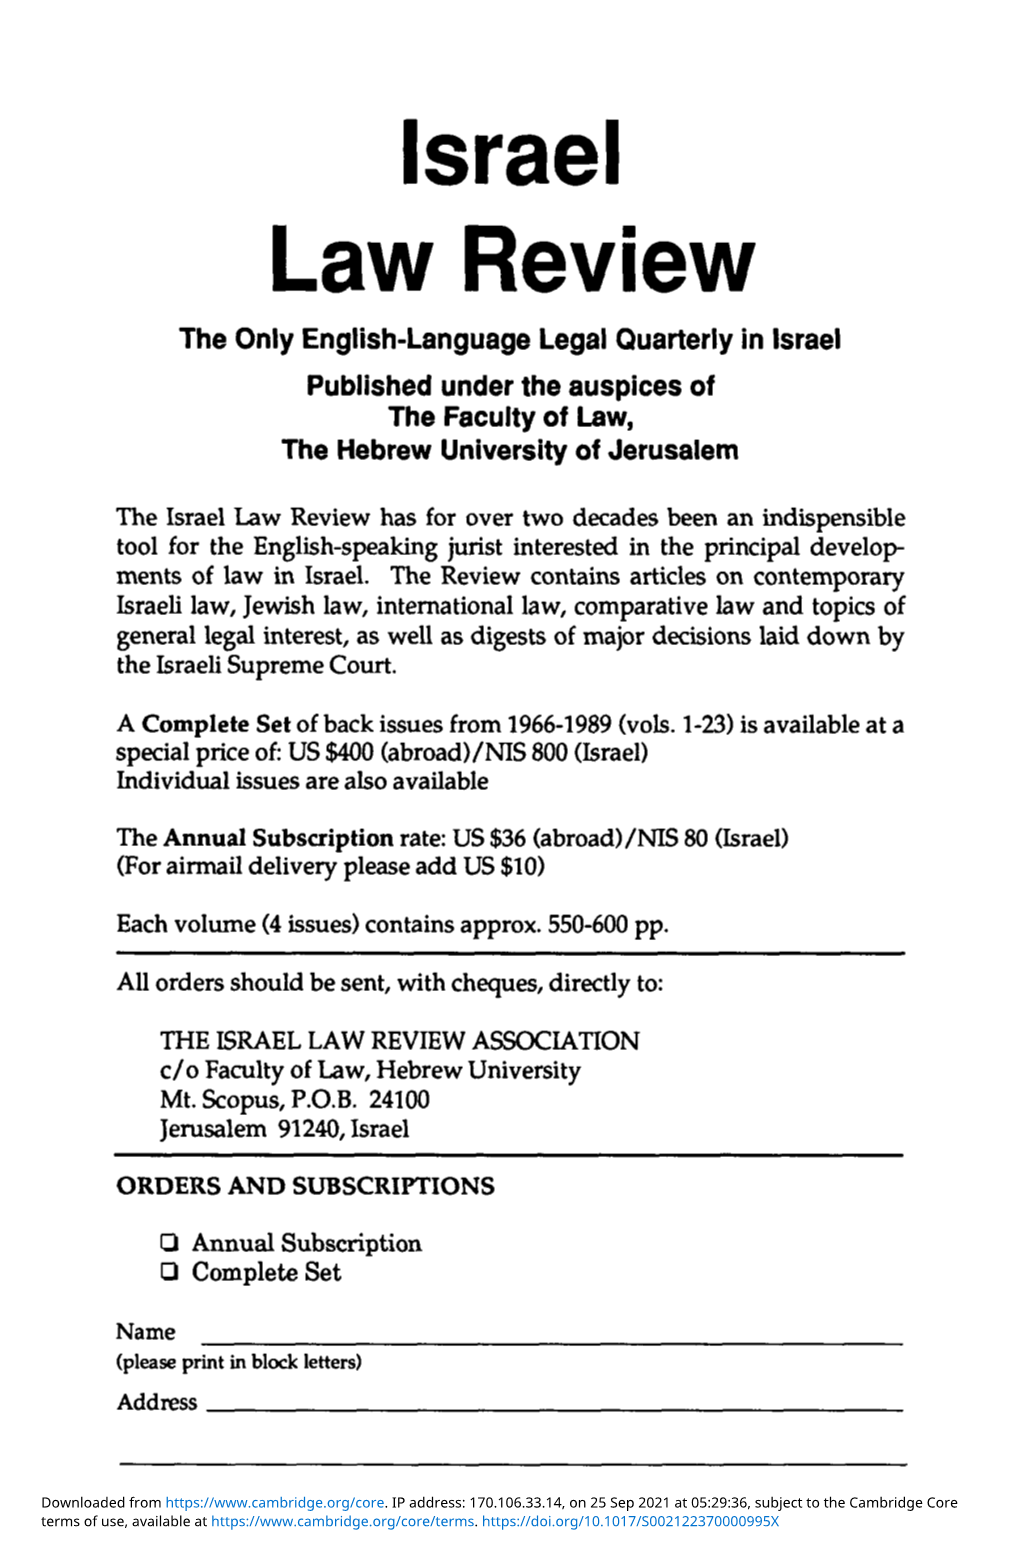 Israel Law Review the Only English-Language Legal Quarterly in Israel Published Under the Auspices of the Faculty of Law, the Hebrew University of Jerusalem